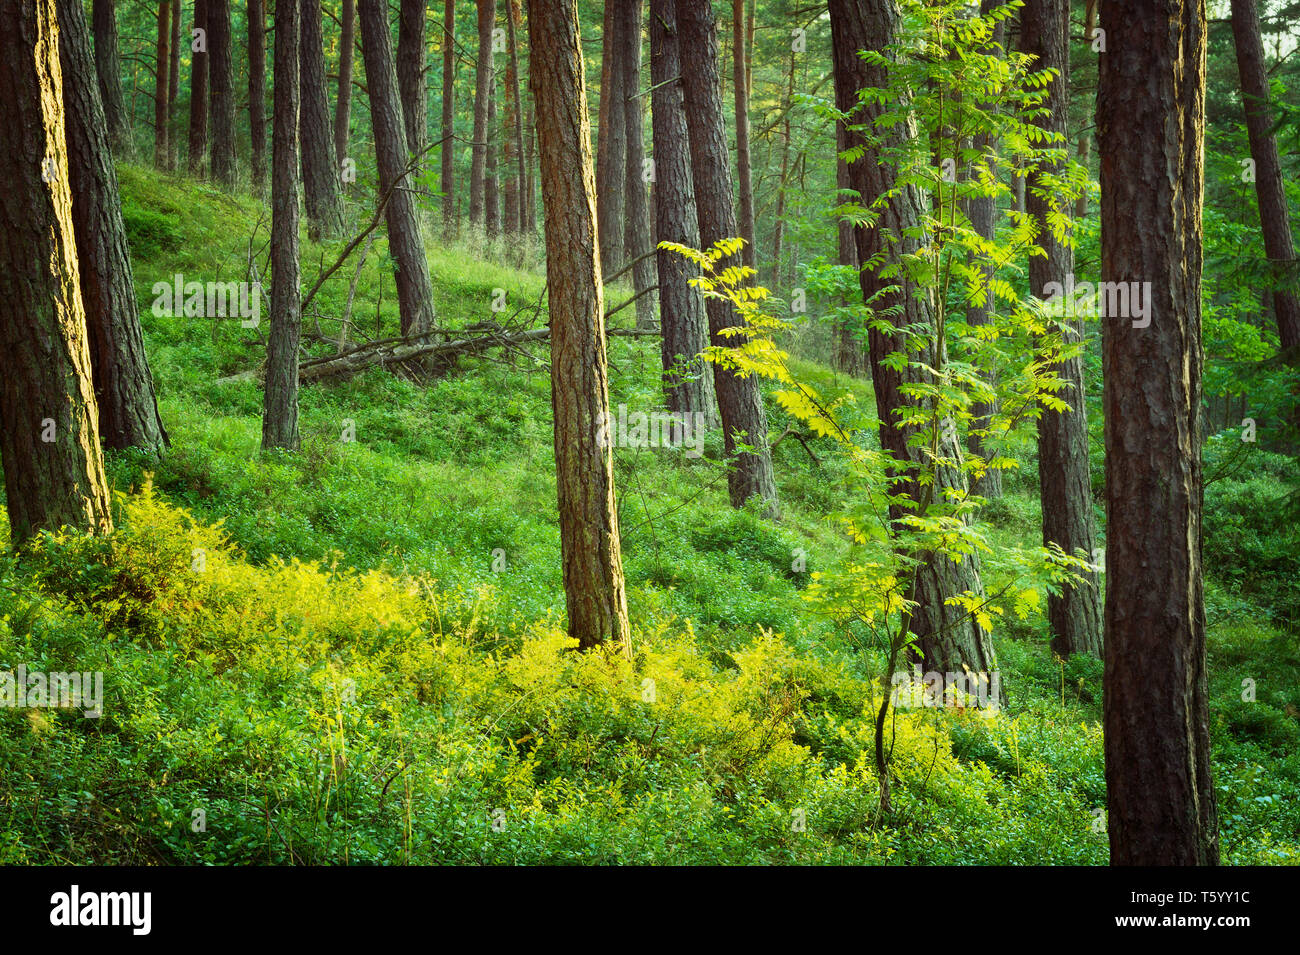 Summer pinewood and bilberry plants on the forest floor. Scots or Scotch pine Pinus sylvestris trees in evergreen coniferous forest. Pomerania, Poland Stock Photo